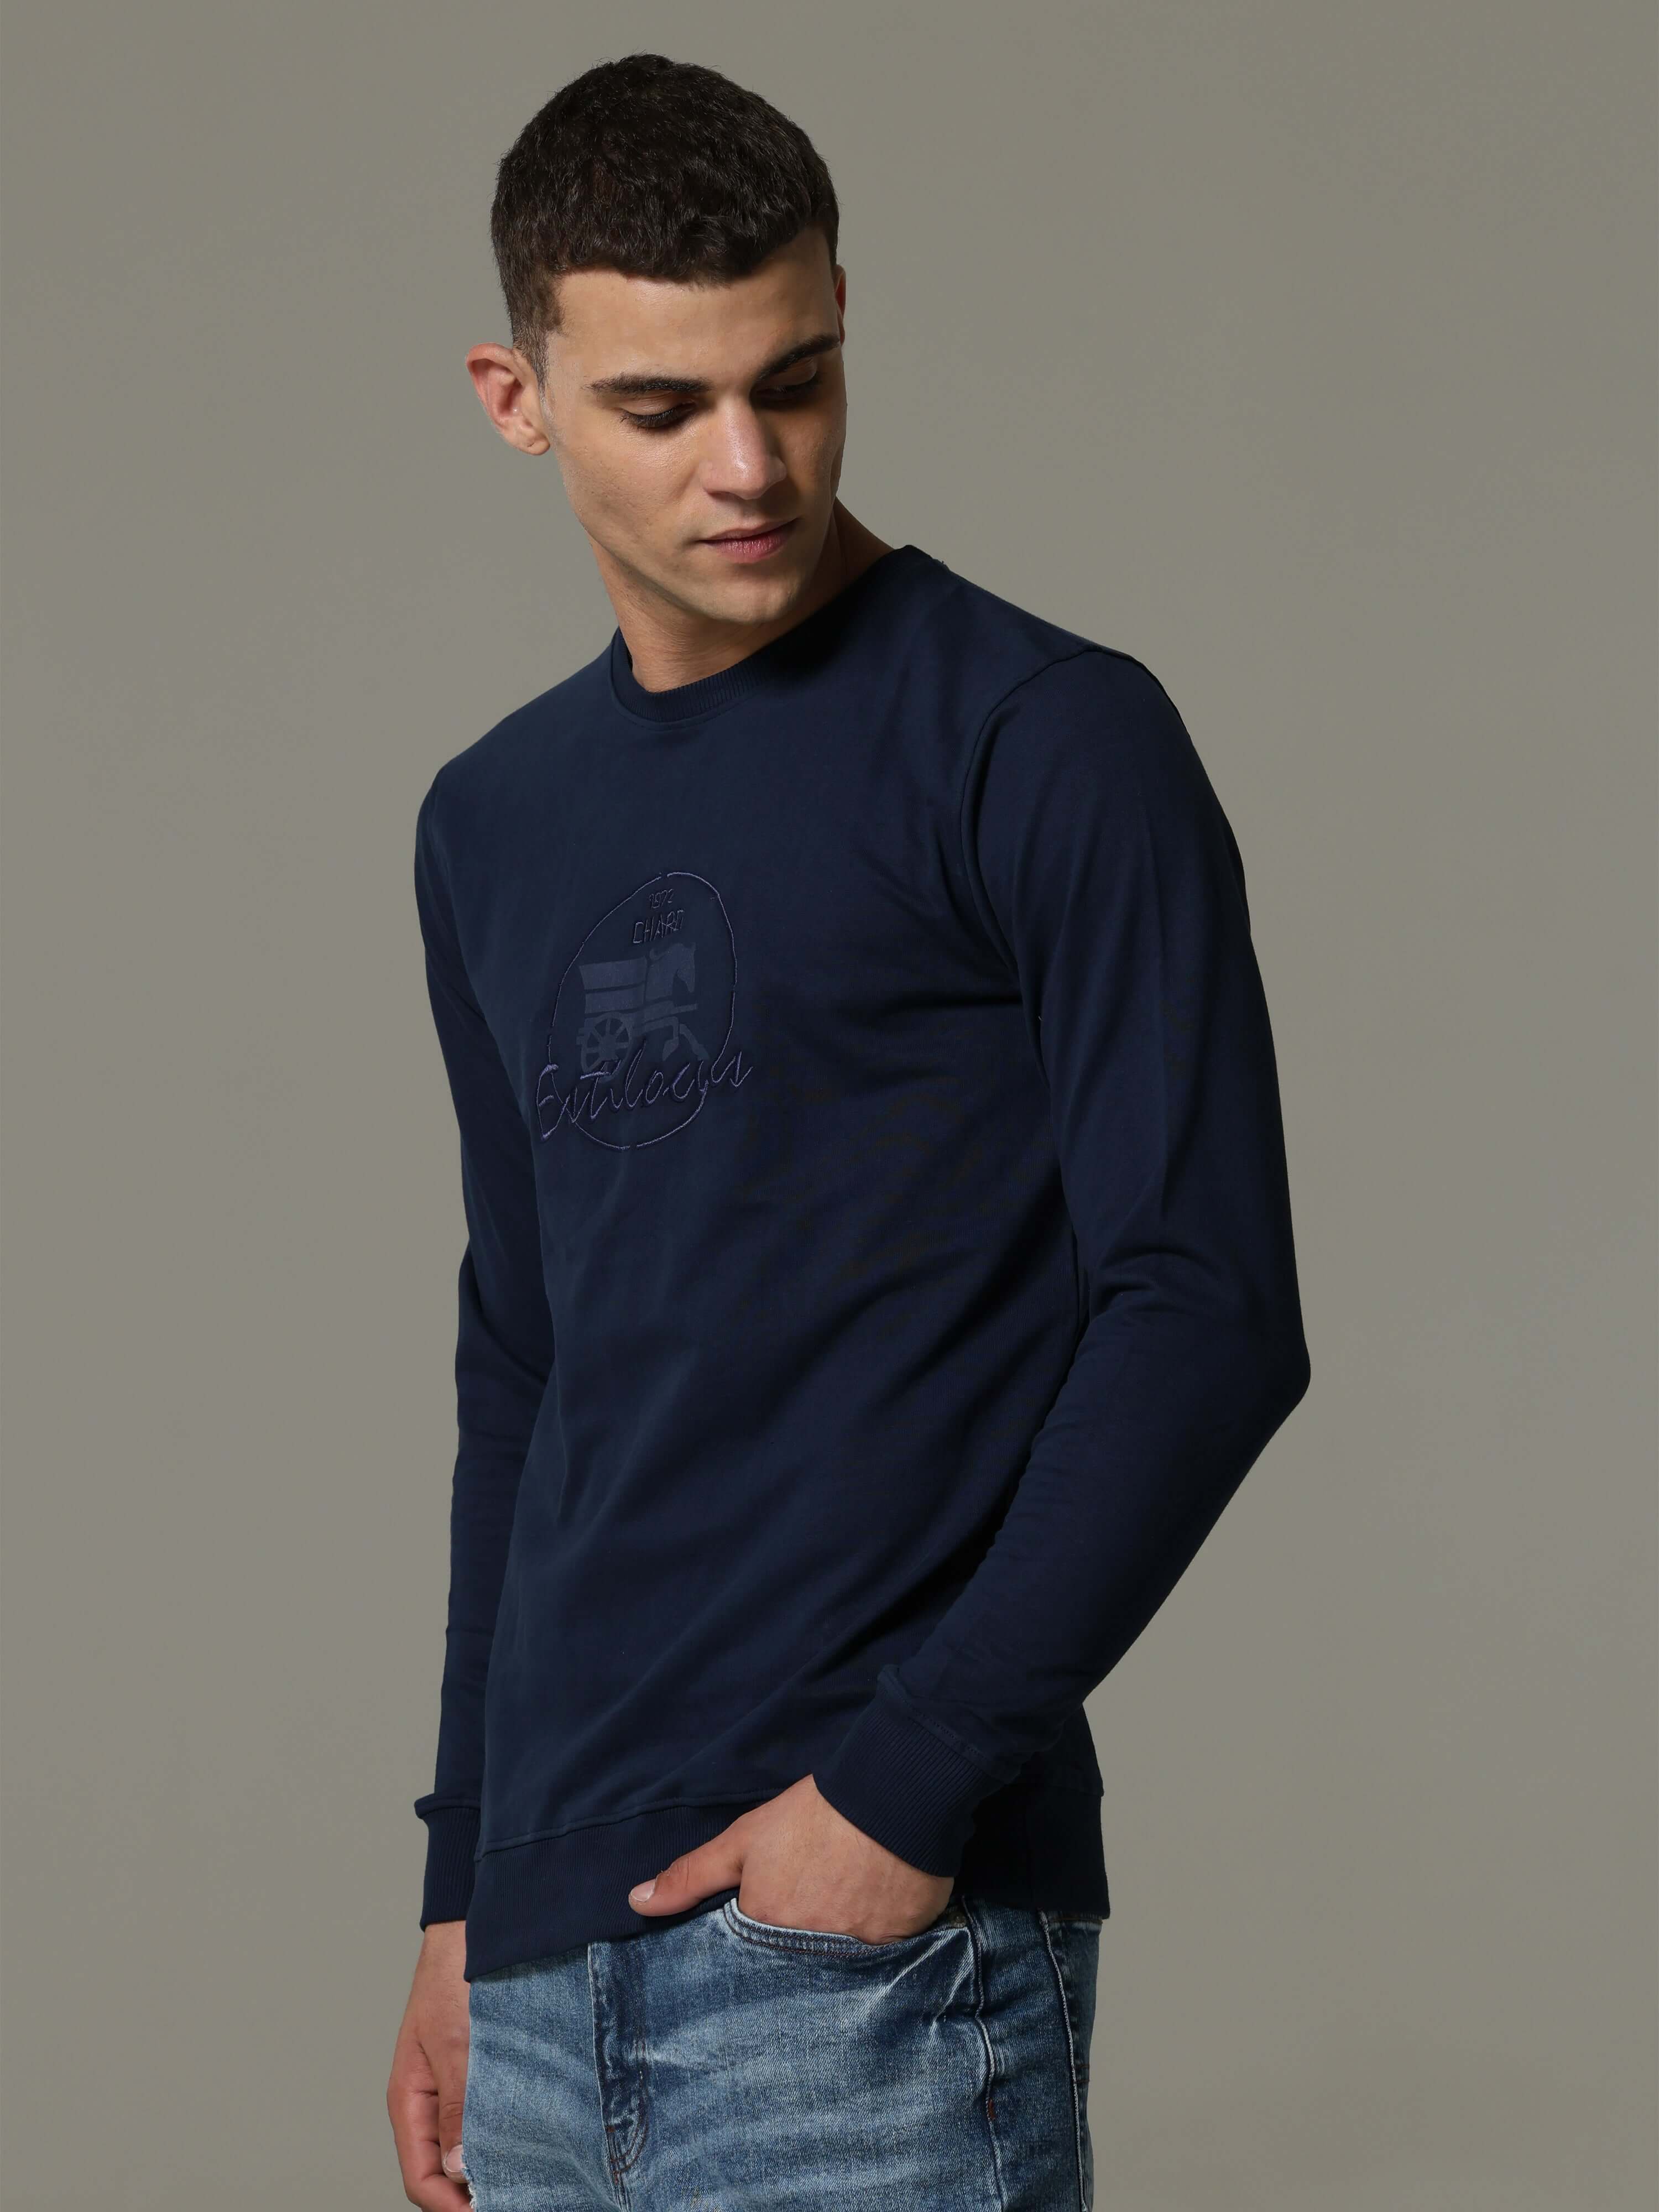 Invisible Blue Sweat Shirt shop online at Estilocus. • Crew neck• Long sleeve• Ribbing around neckline, Cuff & hem• High-quality print and fine embroidery.• Invisible zipper at sleeve Fit : Comfort fit Size : The model is wearing M size Model height : 6 F